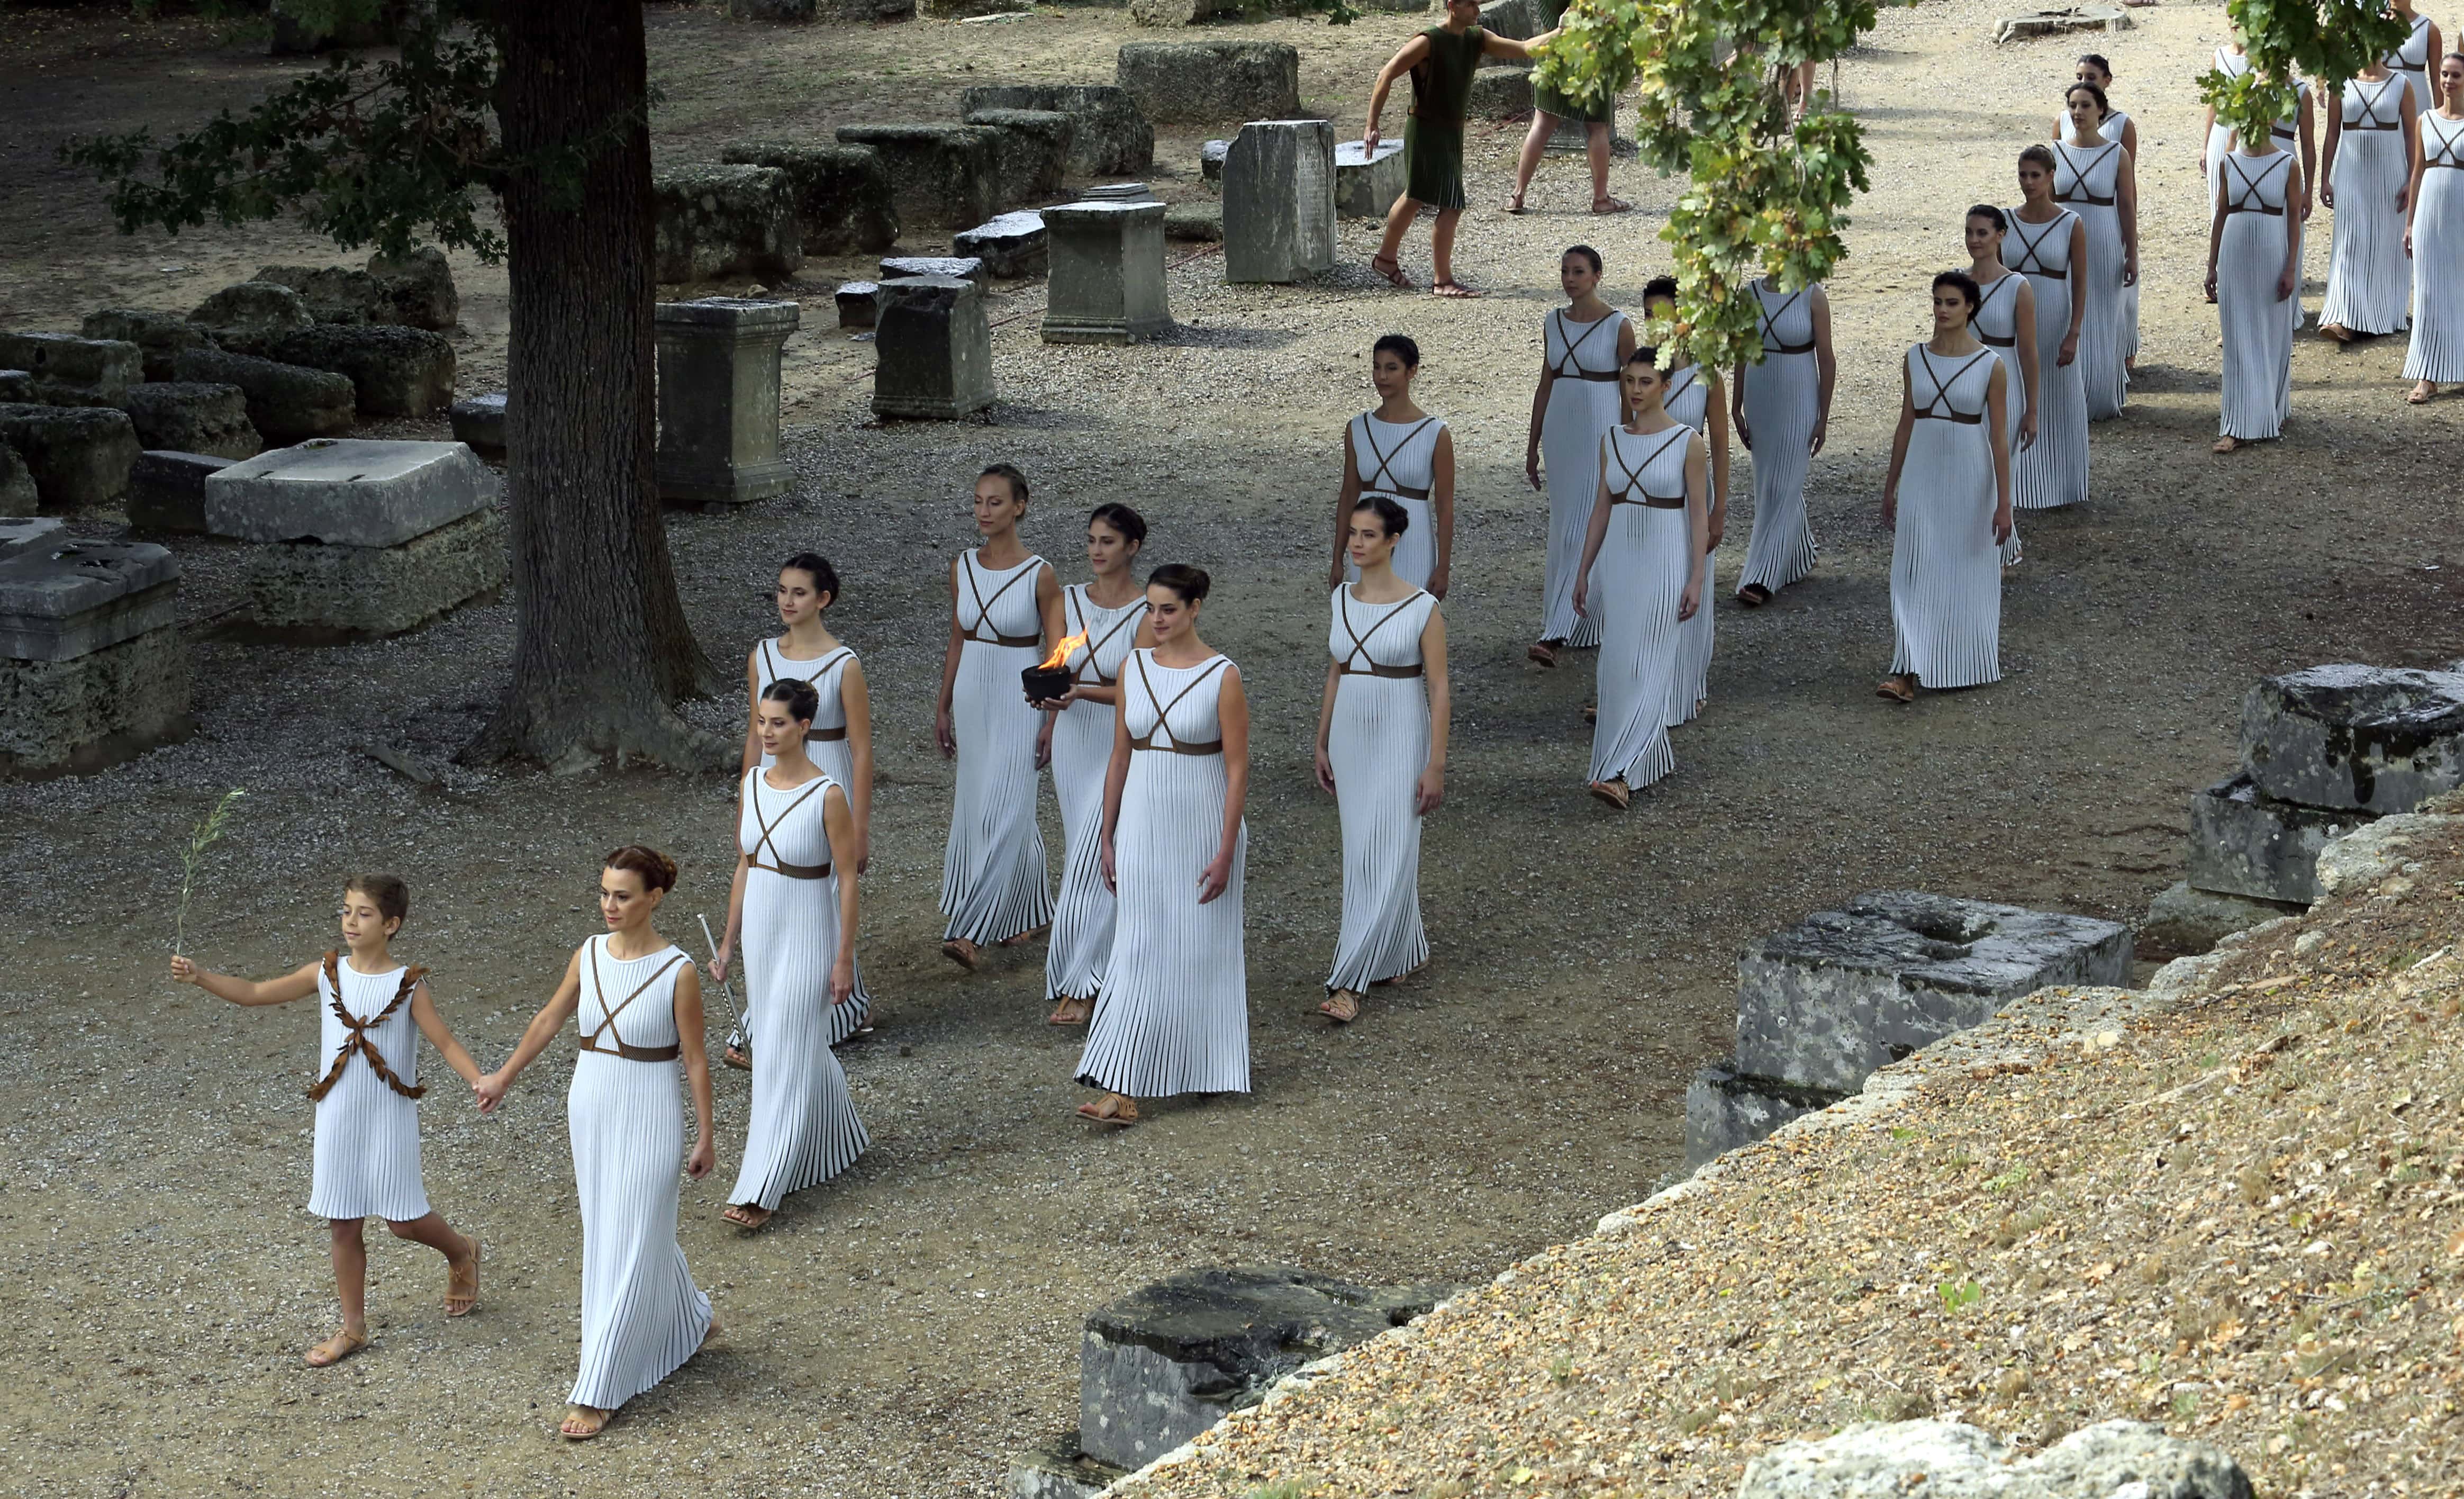 The Ancient Olympics facts